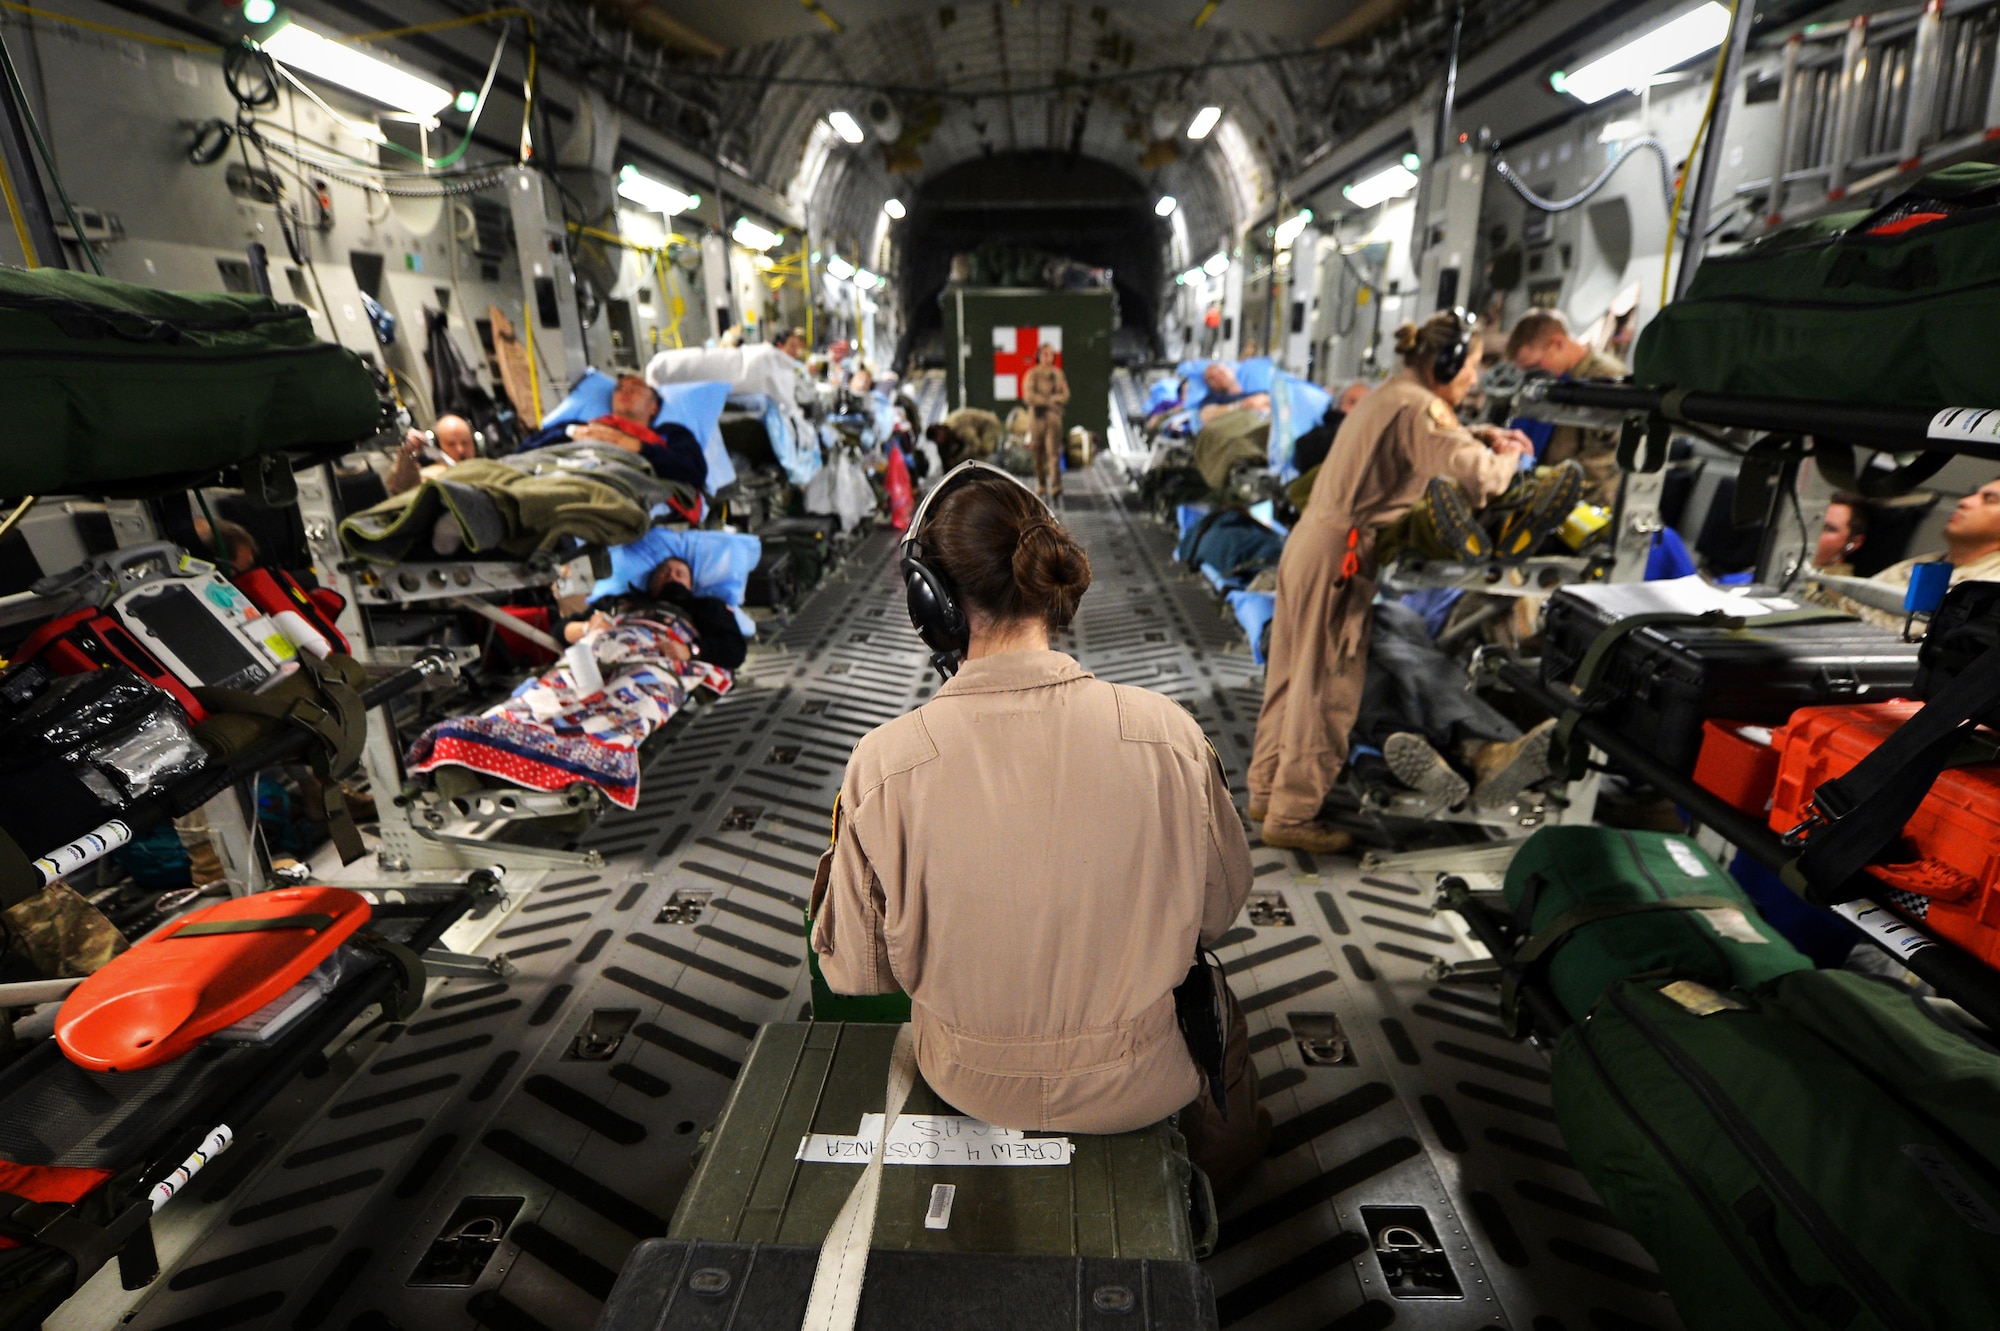 Members of the of the 455th Expeditionary Aeromedical Evacuation Squadron assist patients on medical transport flight out of Bagram Airfield, Afghanistan. Air Force nurse scientists are conducting valuable research to improve en route patient care during aeromedical evacuations.